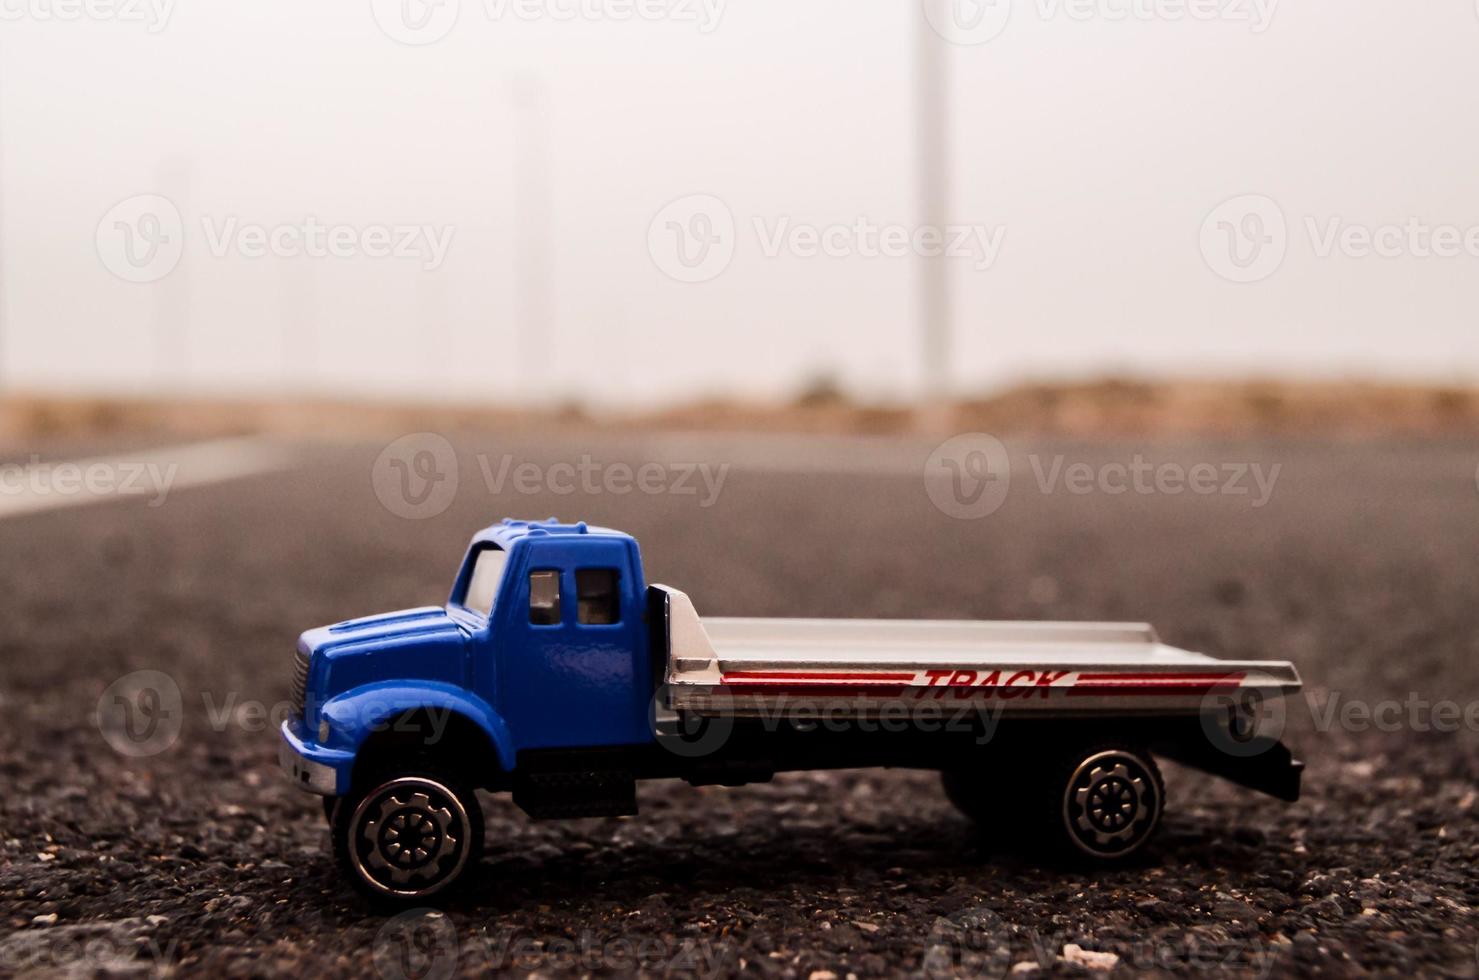 Miniature truck on the road photo